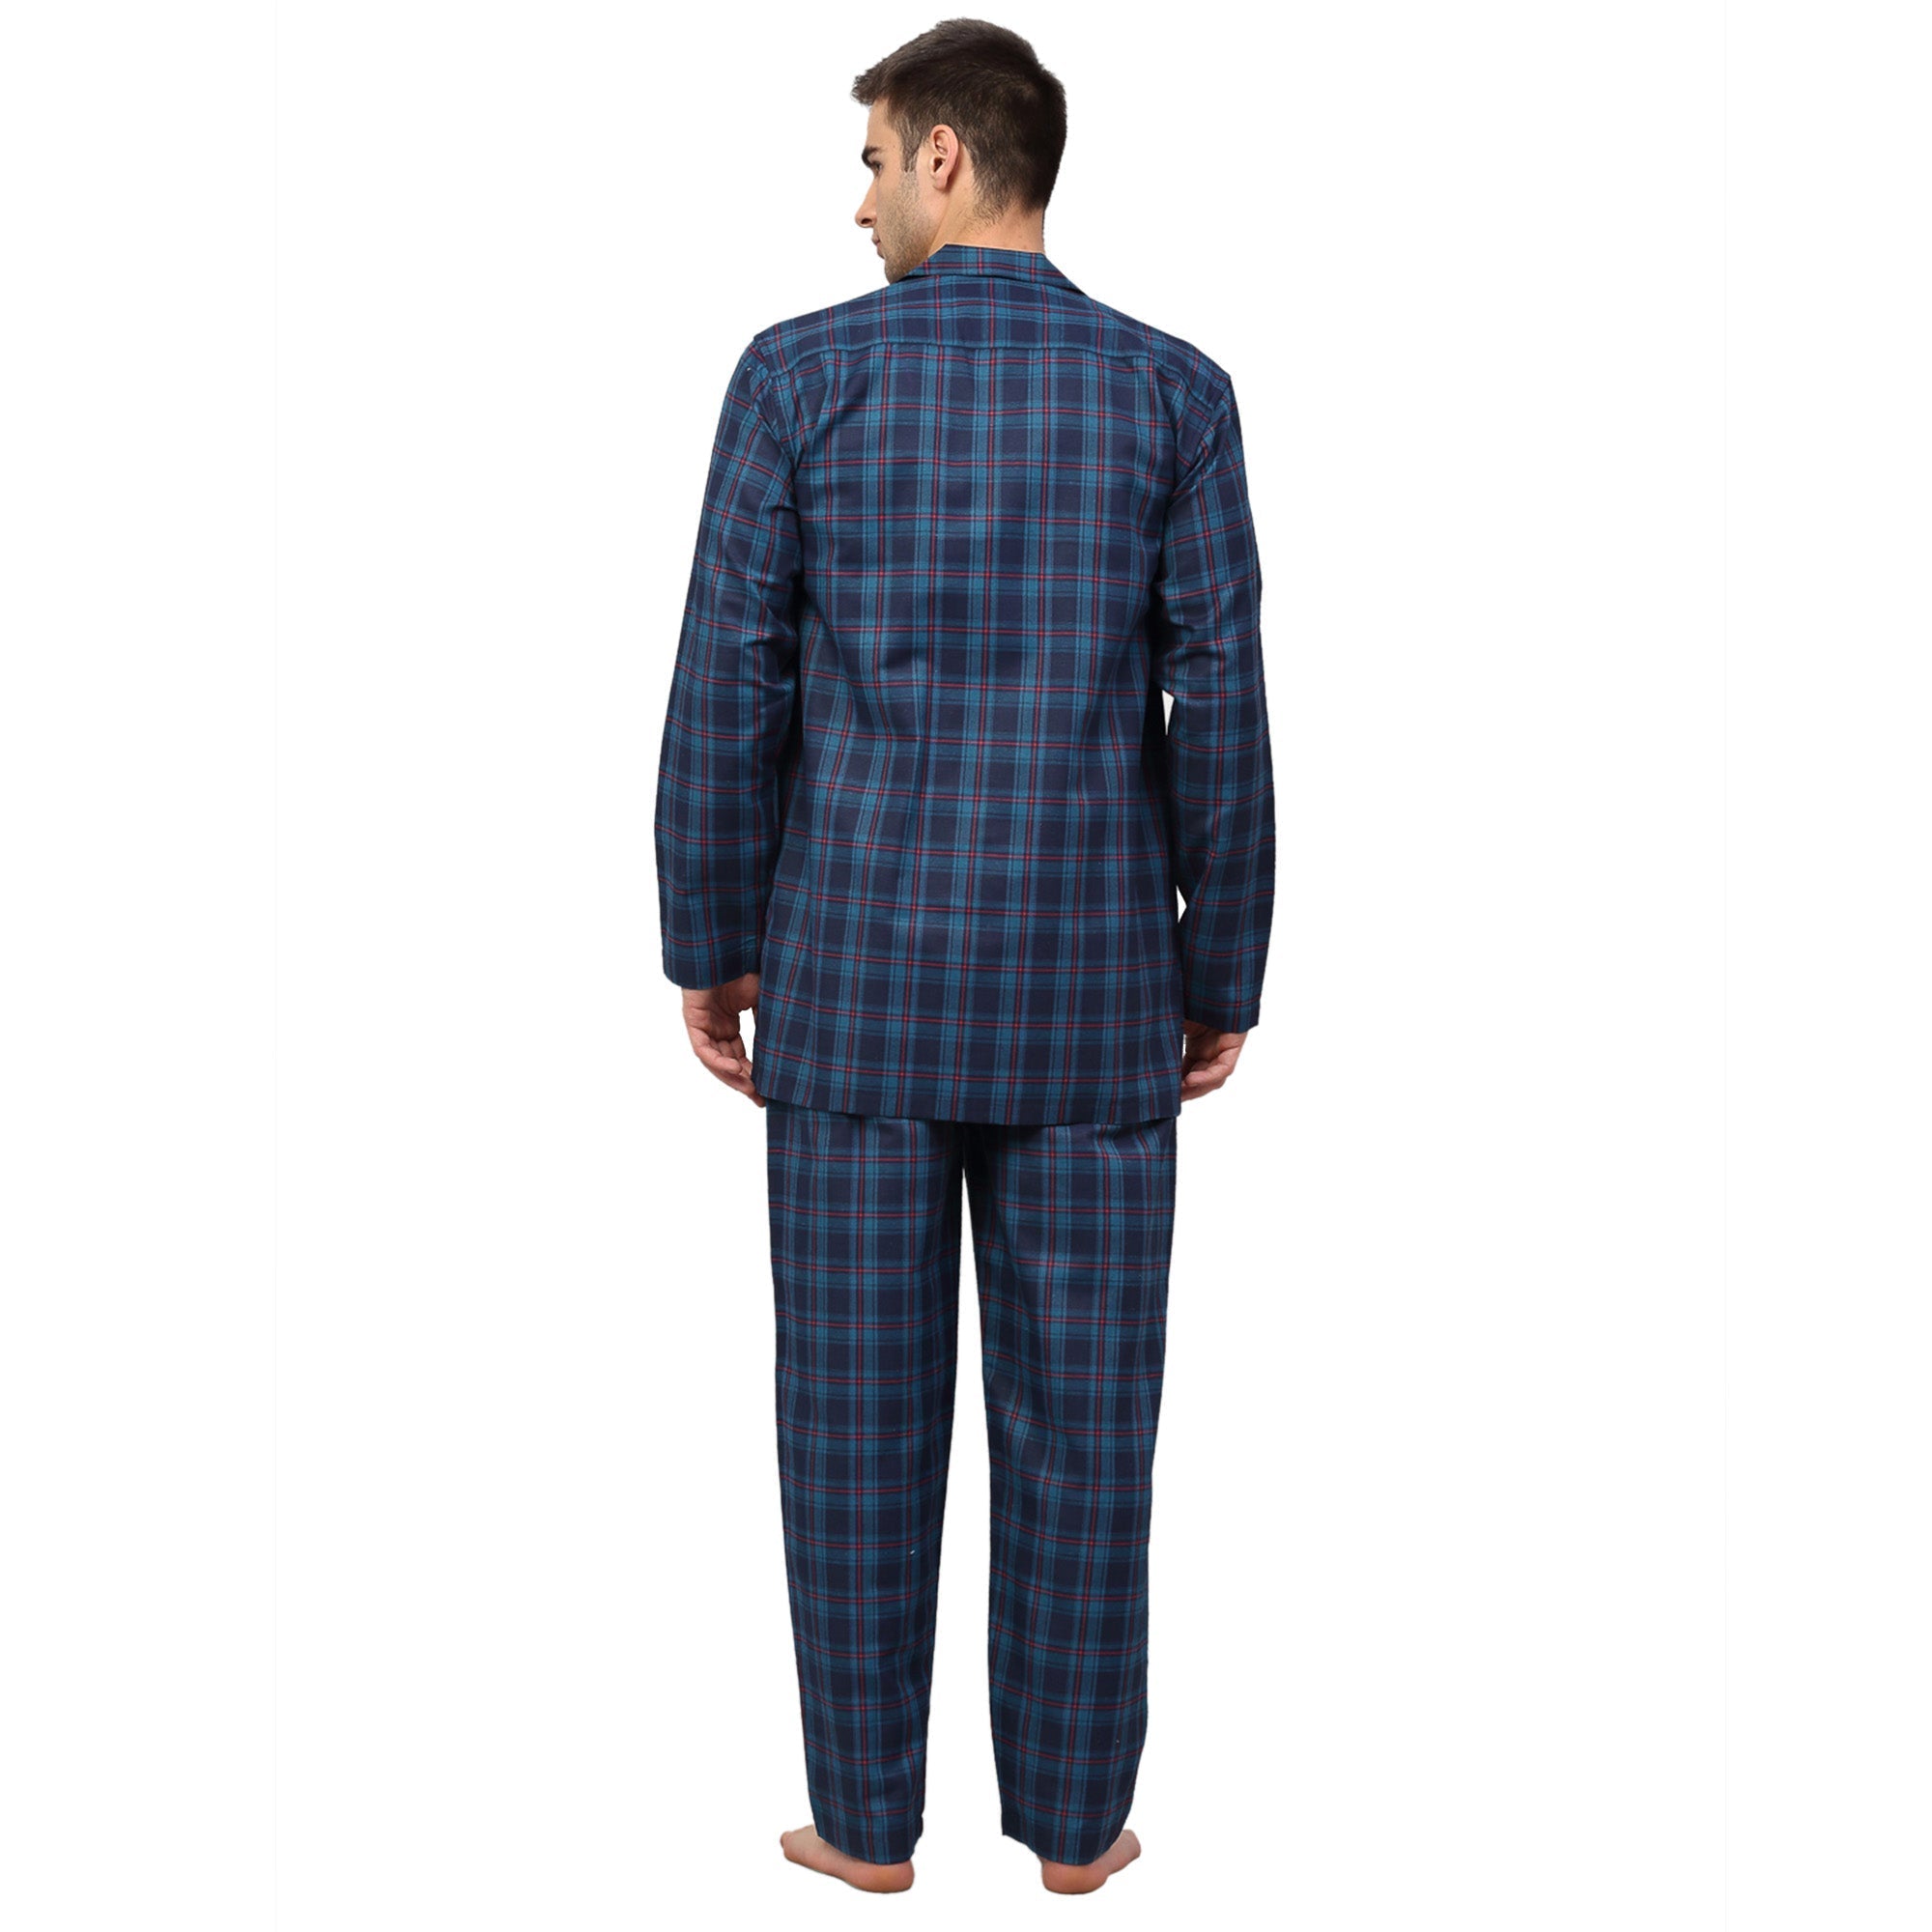 Men's Navy Blue Checked Night Suits ( GNS 001Navy ) - Jainish